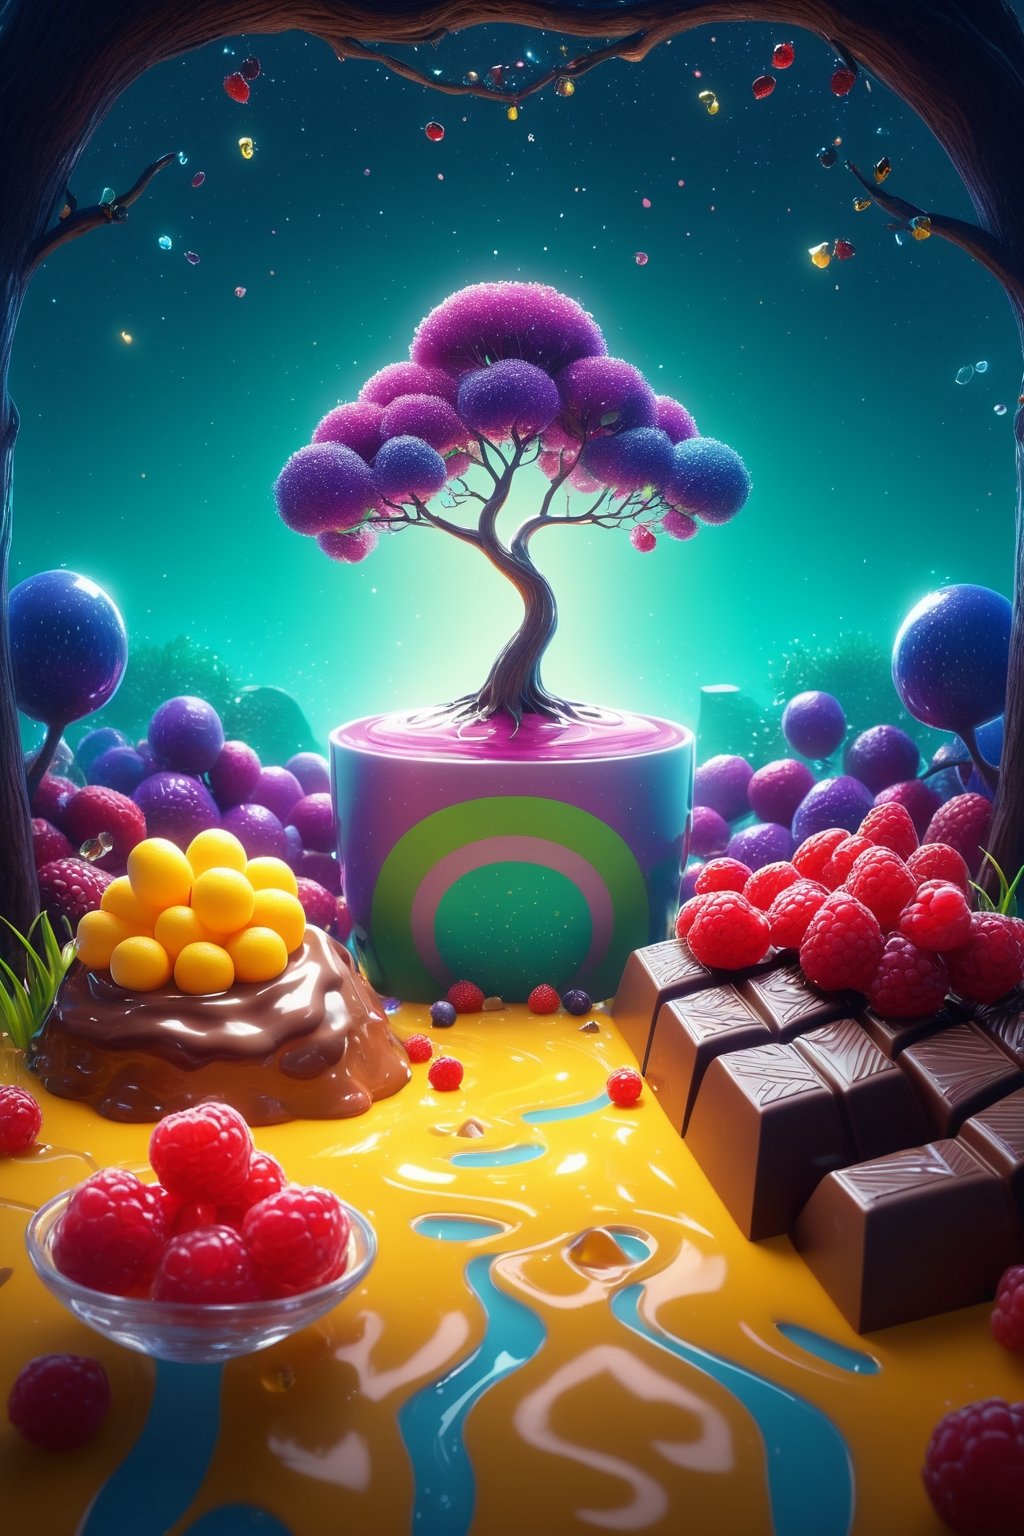 (Masterpiece), (best quality), top quality, fairytale, fantasy, sweet, candy, hyperrealistic, in the style of pixar, 3d, cg unity wallpaper, 8k,  magic, playful, drizzle, syrup, delicious, cinematic,  shimmer, glitter, scenery, striped, smooth edges, water, gradient, particles, shiny, small details, grass, see-through, transparent, colorful, fruit, chocolate, ,beautiful, sunlight,  volumetric lighting, multicolored theme,  (gradients), atmospheric, top lighting, muted colors, soothing tones, intricate details, dynamic, animated,  breathtaking, magical, tree, (deep depth of field:1.1), extremely detailed background, 850mm, digital illustration, more detail XL, glitter